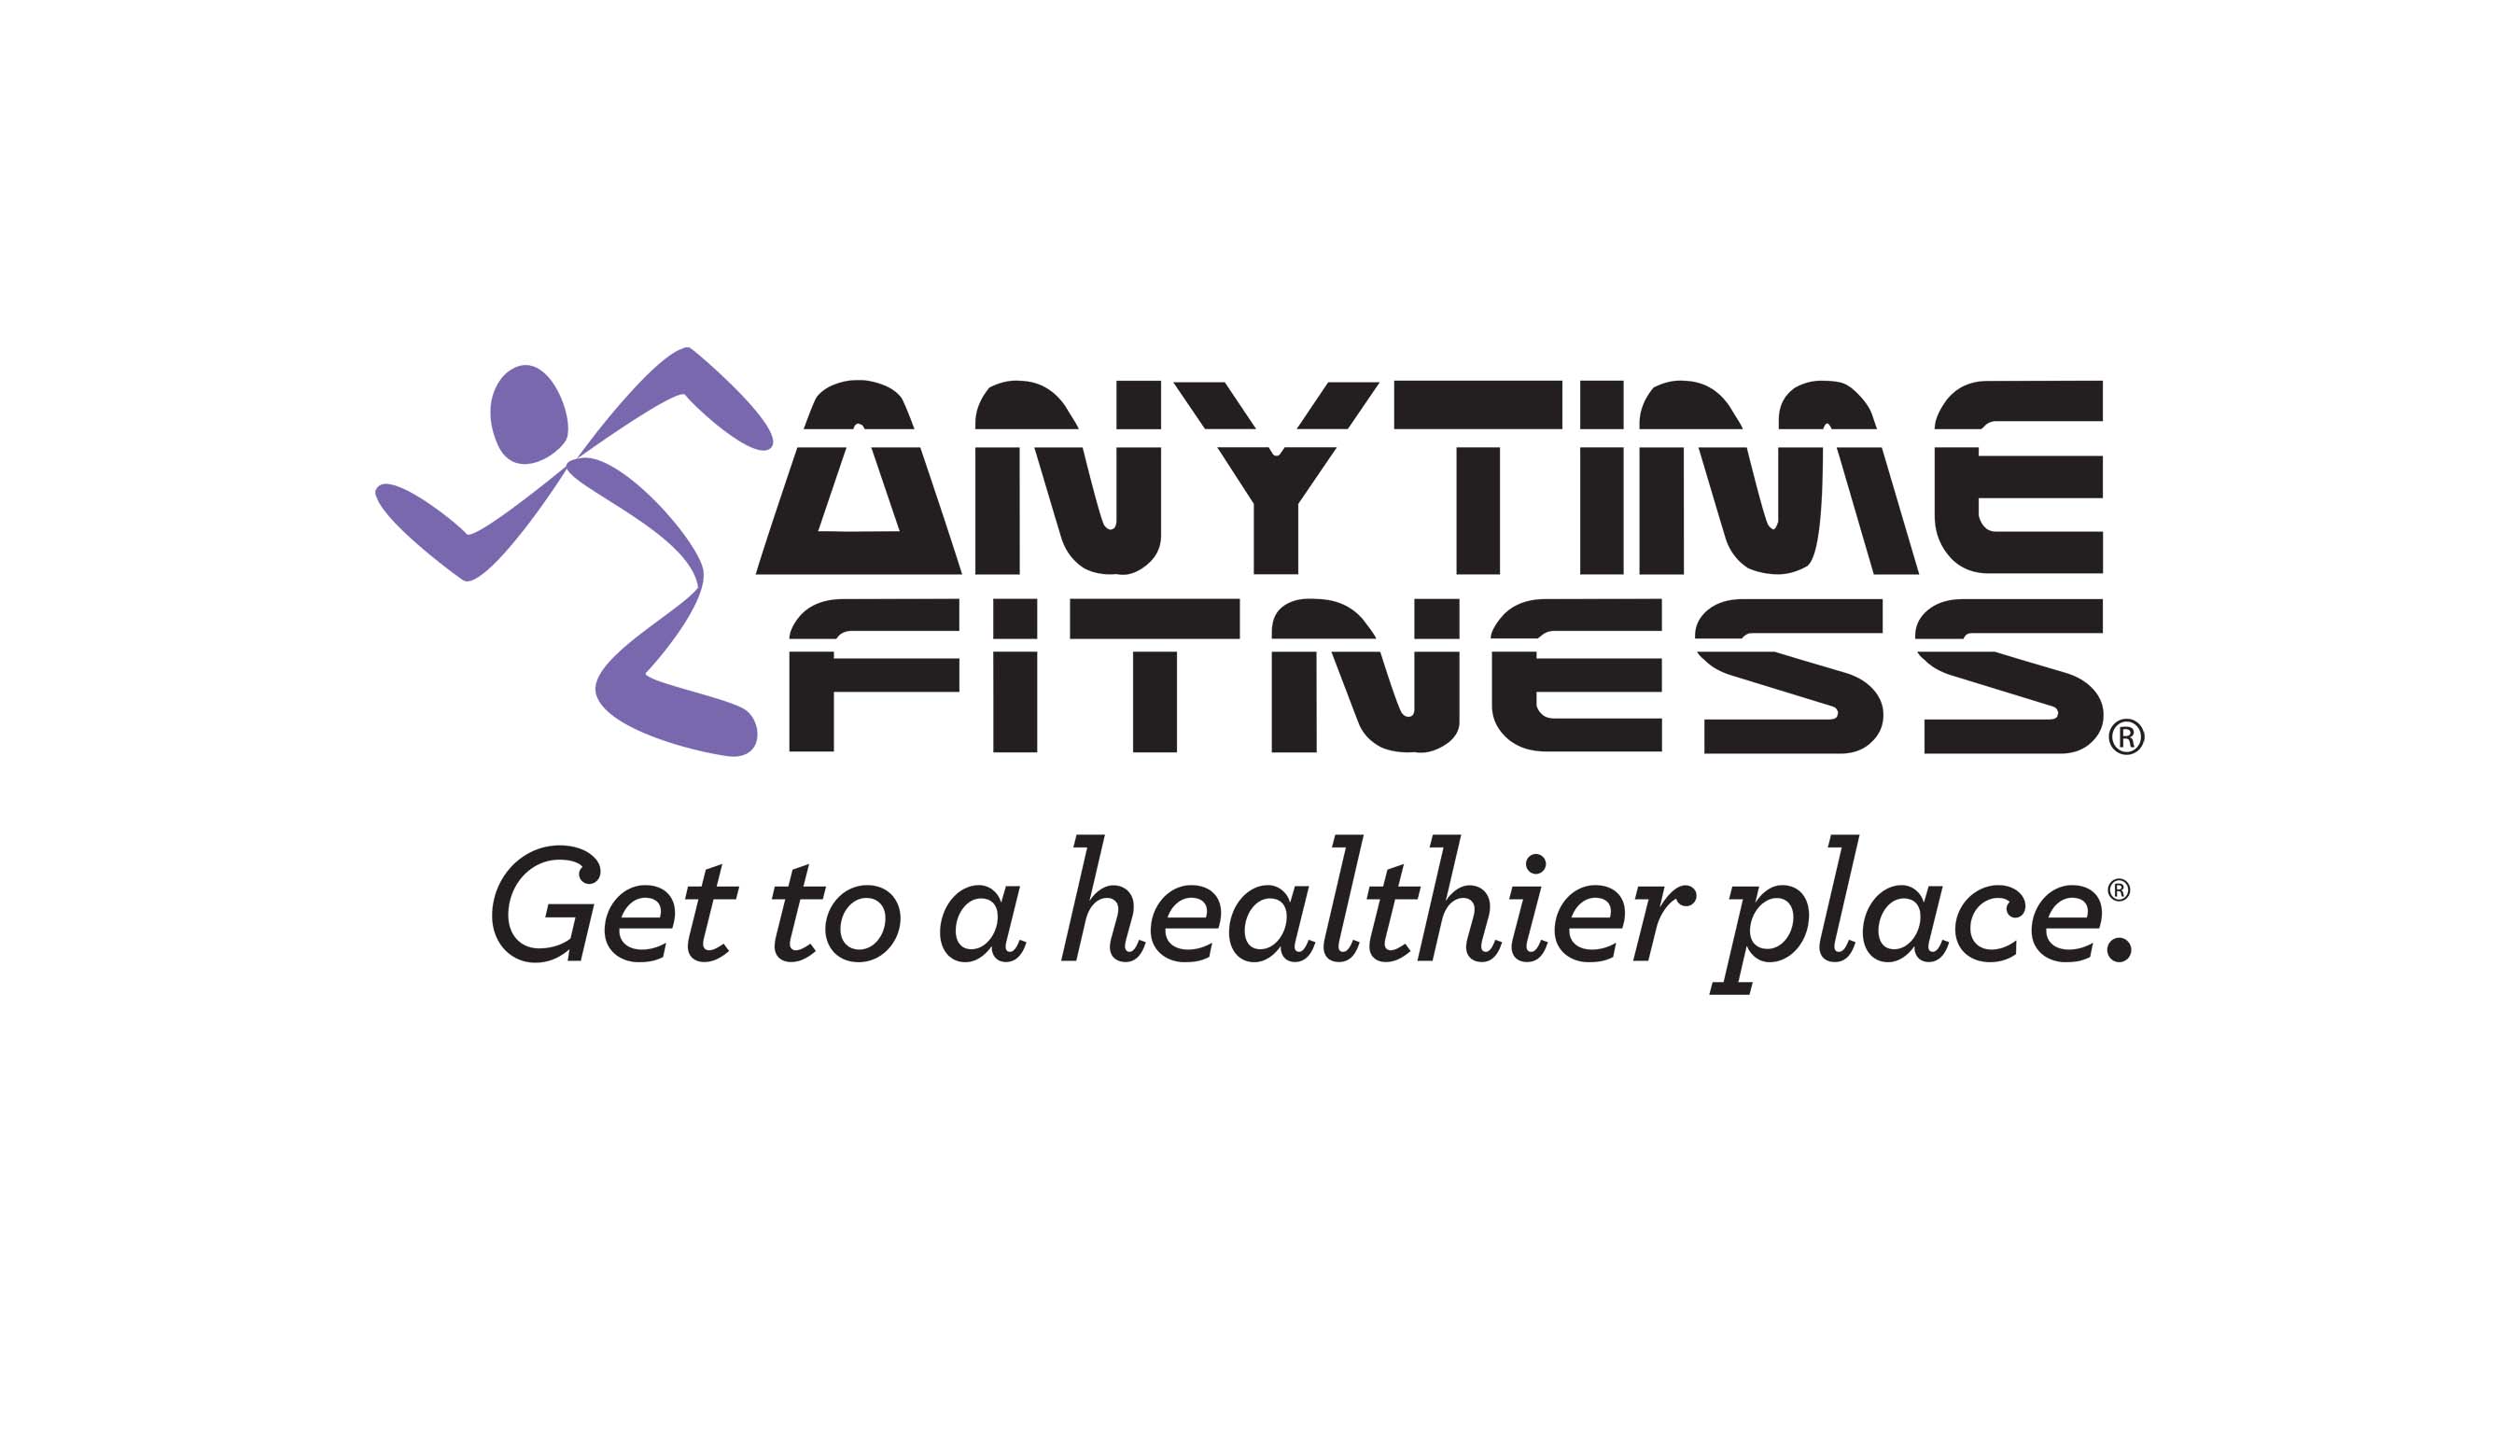 Hundreds Of Anytime Fitness Gym Owners Are Reserving Parking Spaces For ...